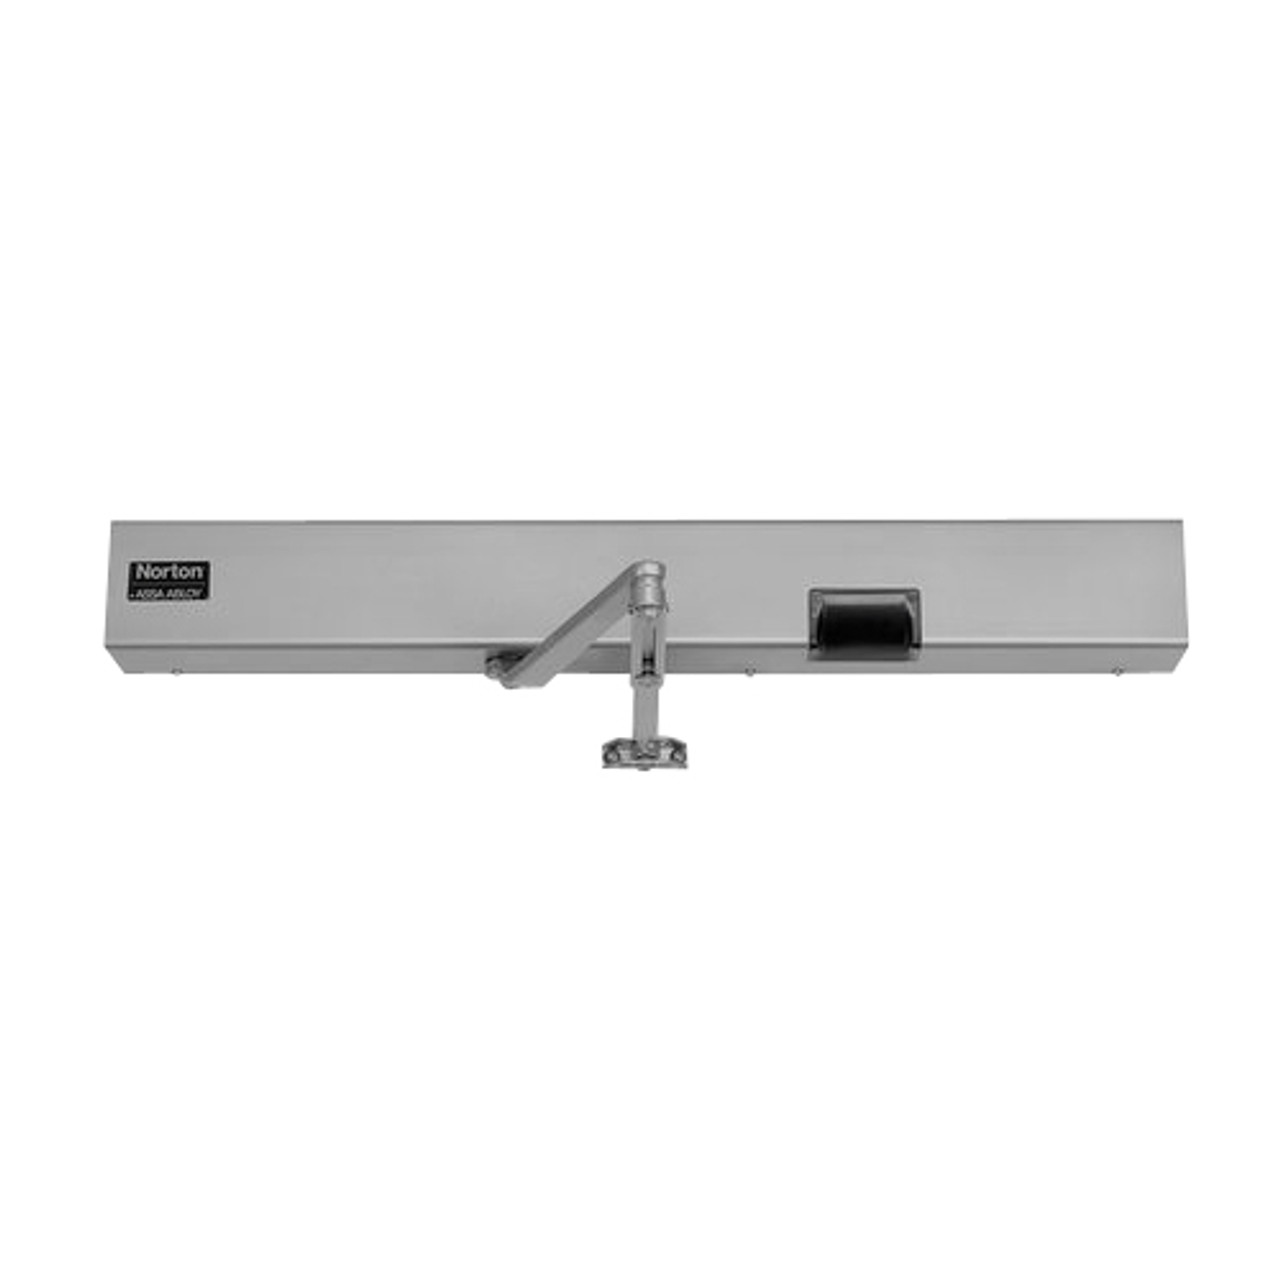 7132SZ-DZ-RH-120VAC-689 Norton 7100SZ Series Safe Zone Multi-Point Closer/Holder with Motion Sensor and Push Side Double Lever 13-1/2 inch Main Arm in Aluminum Finish